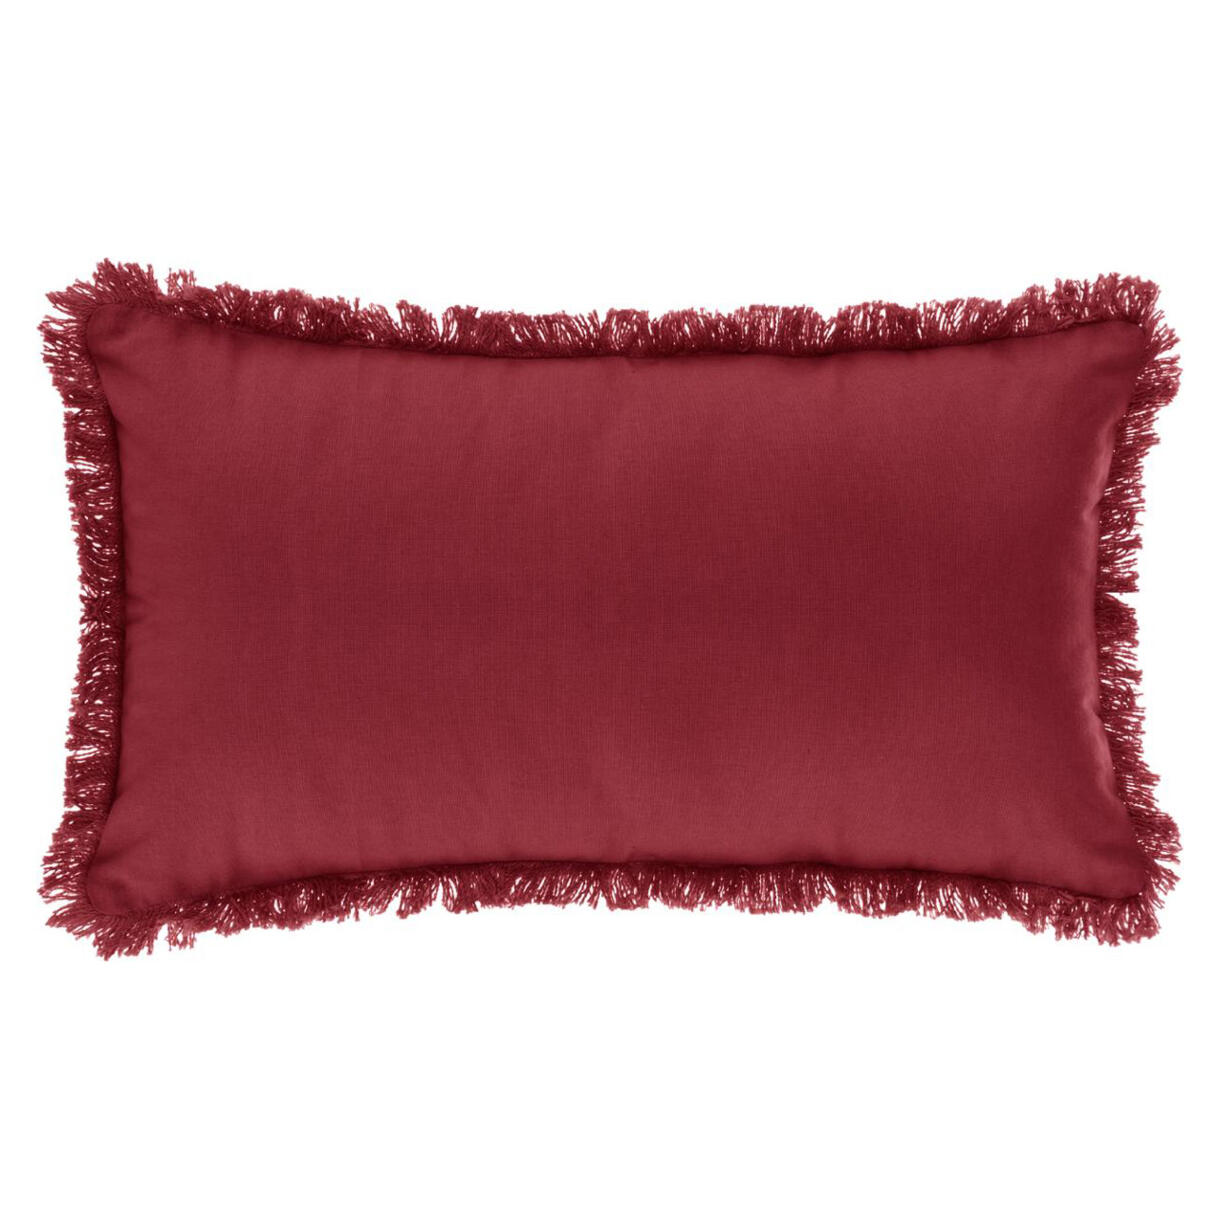 Coussin rectangulaire Datara franges Rouge 1